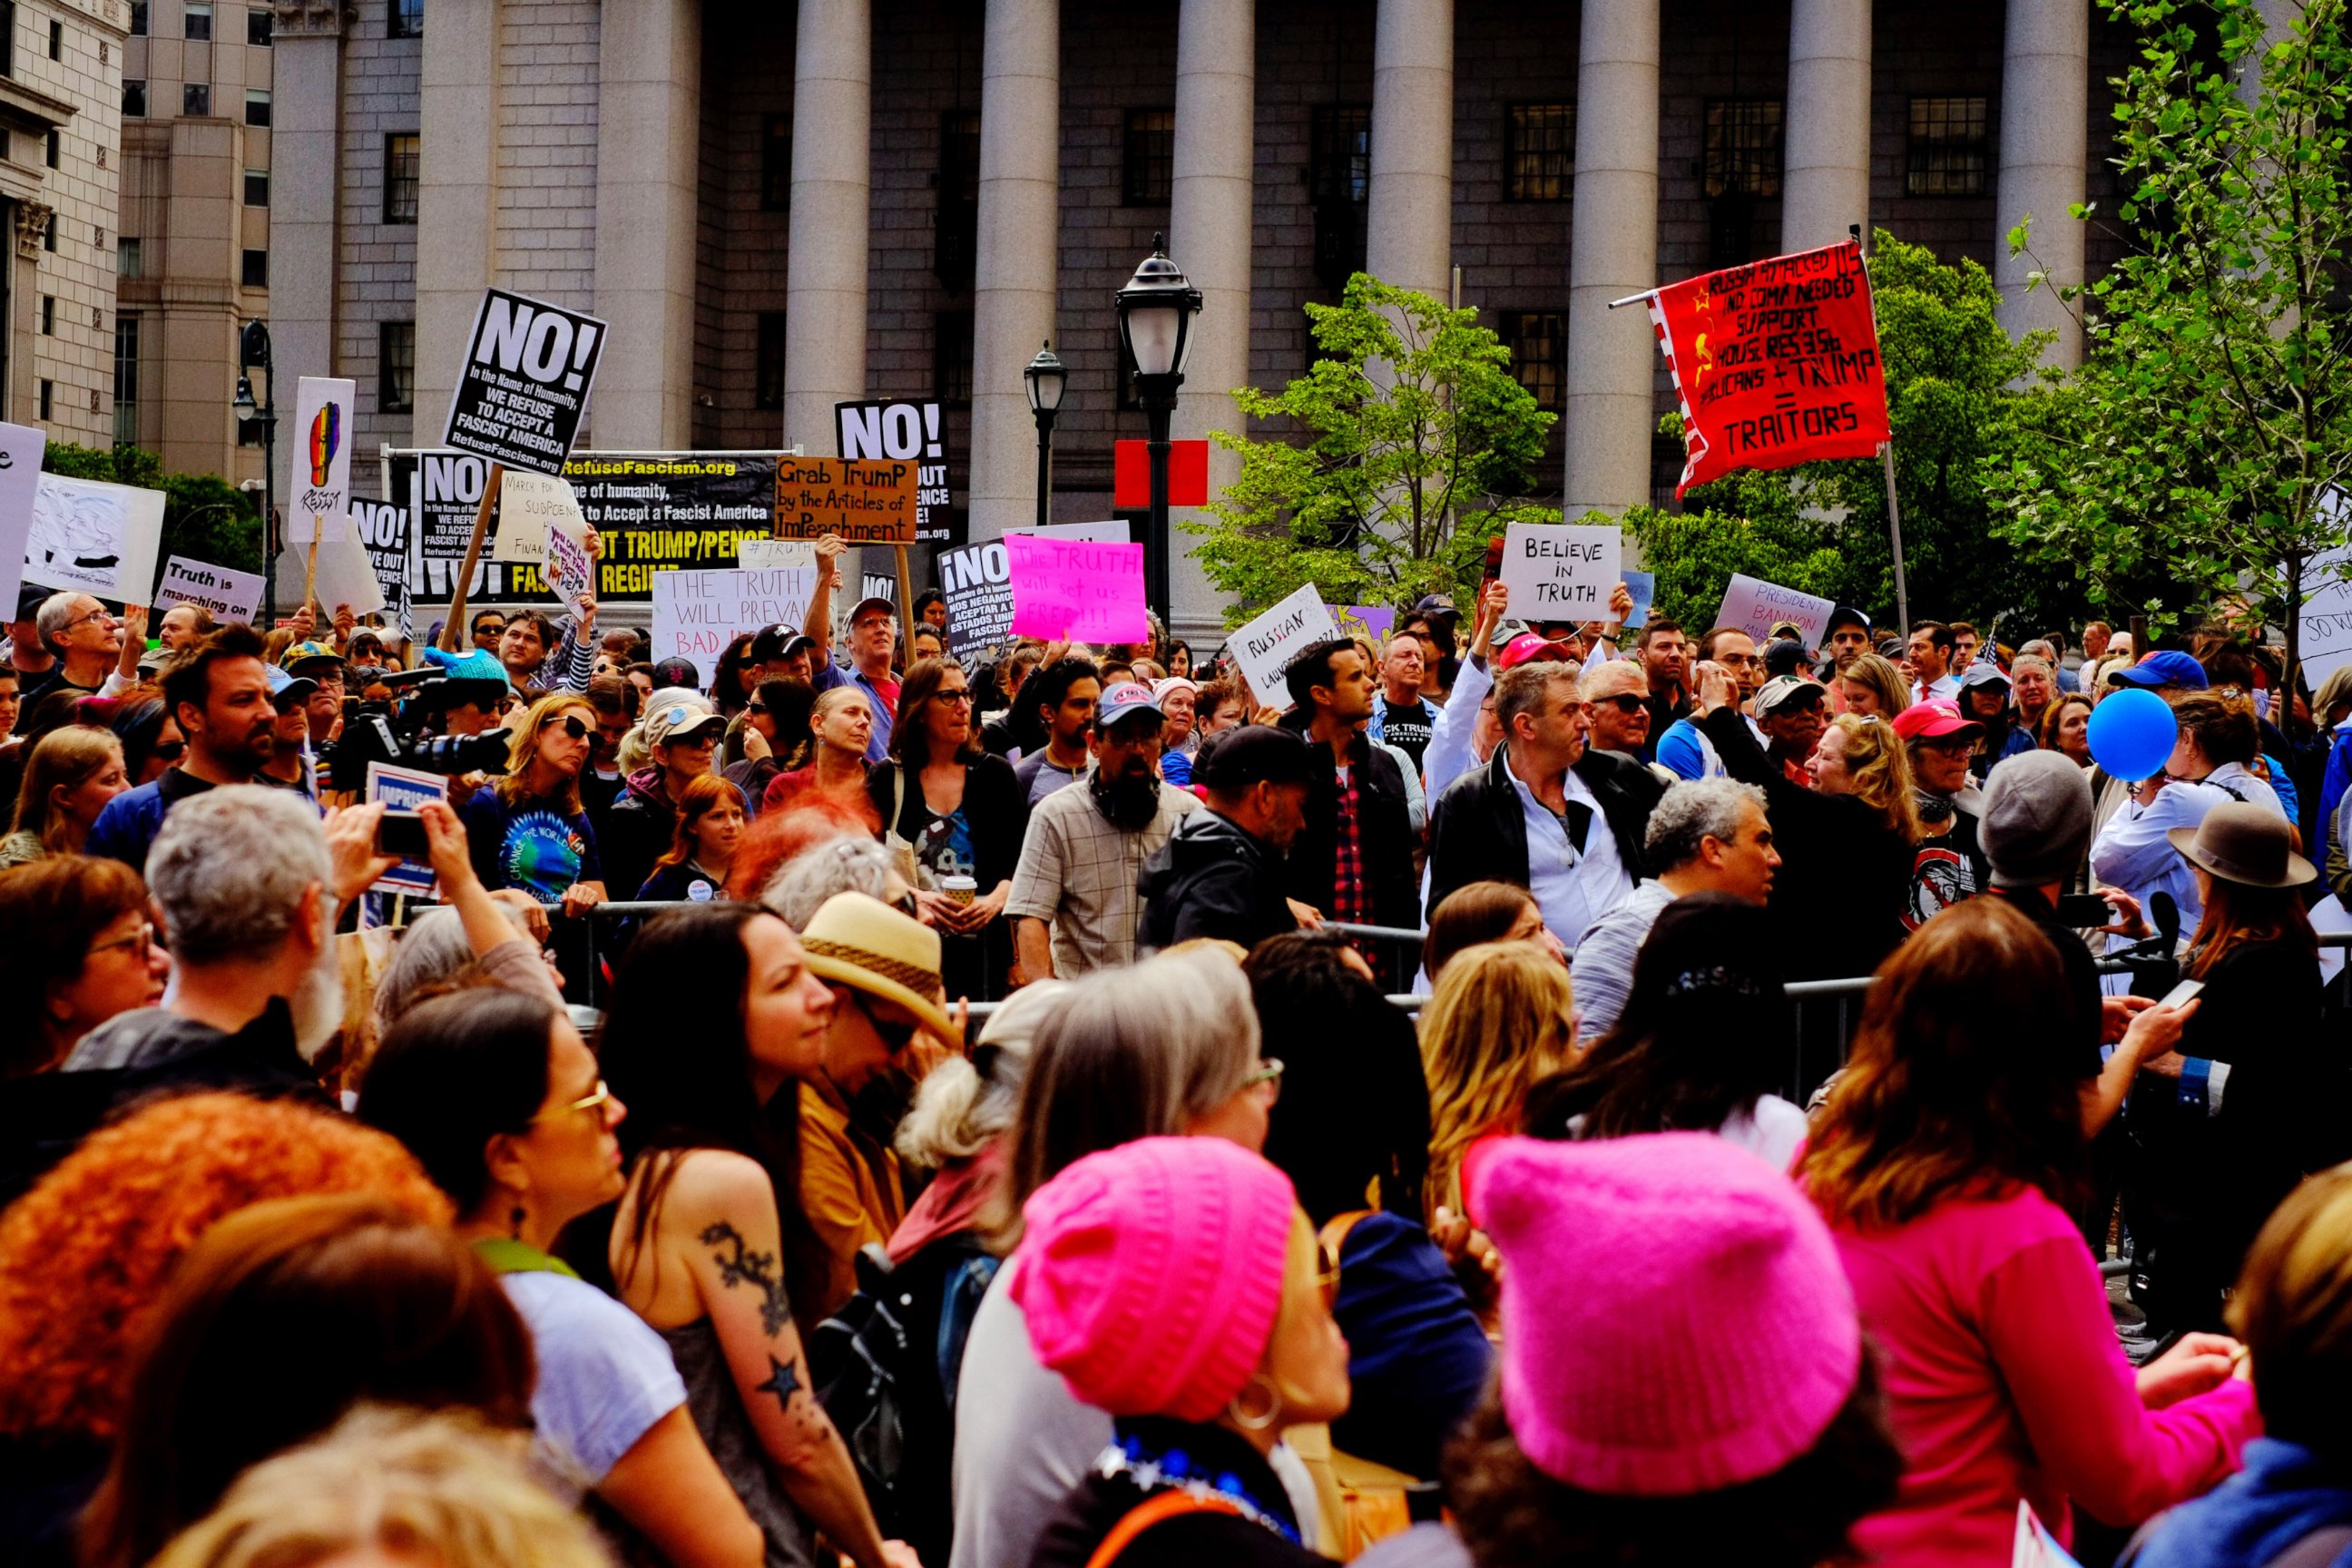 PHOTO: Demonstrators take part in an anti-Trump "March for Truth" rally at Foley Square on June 3, 2017 in New York City. 